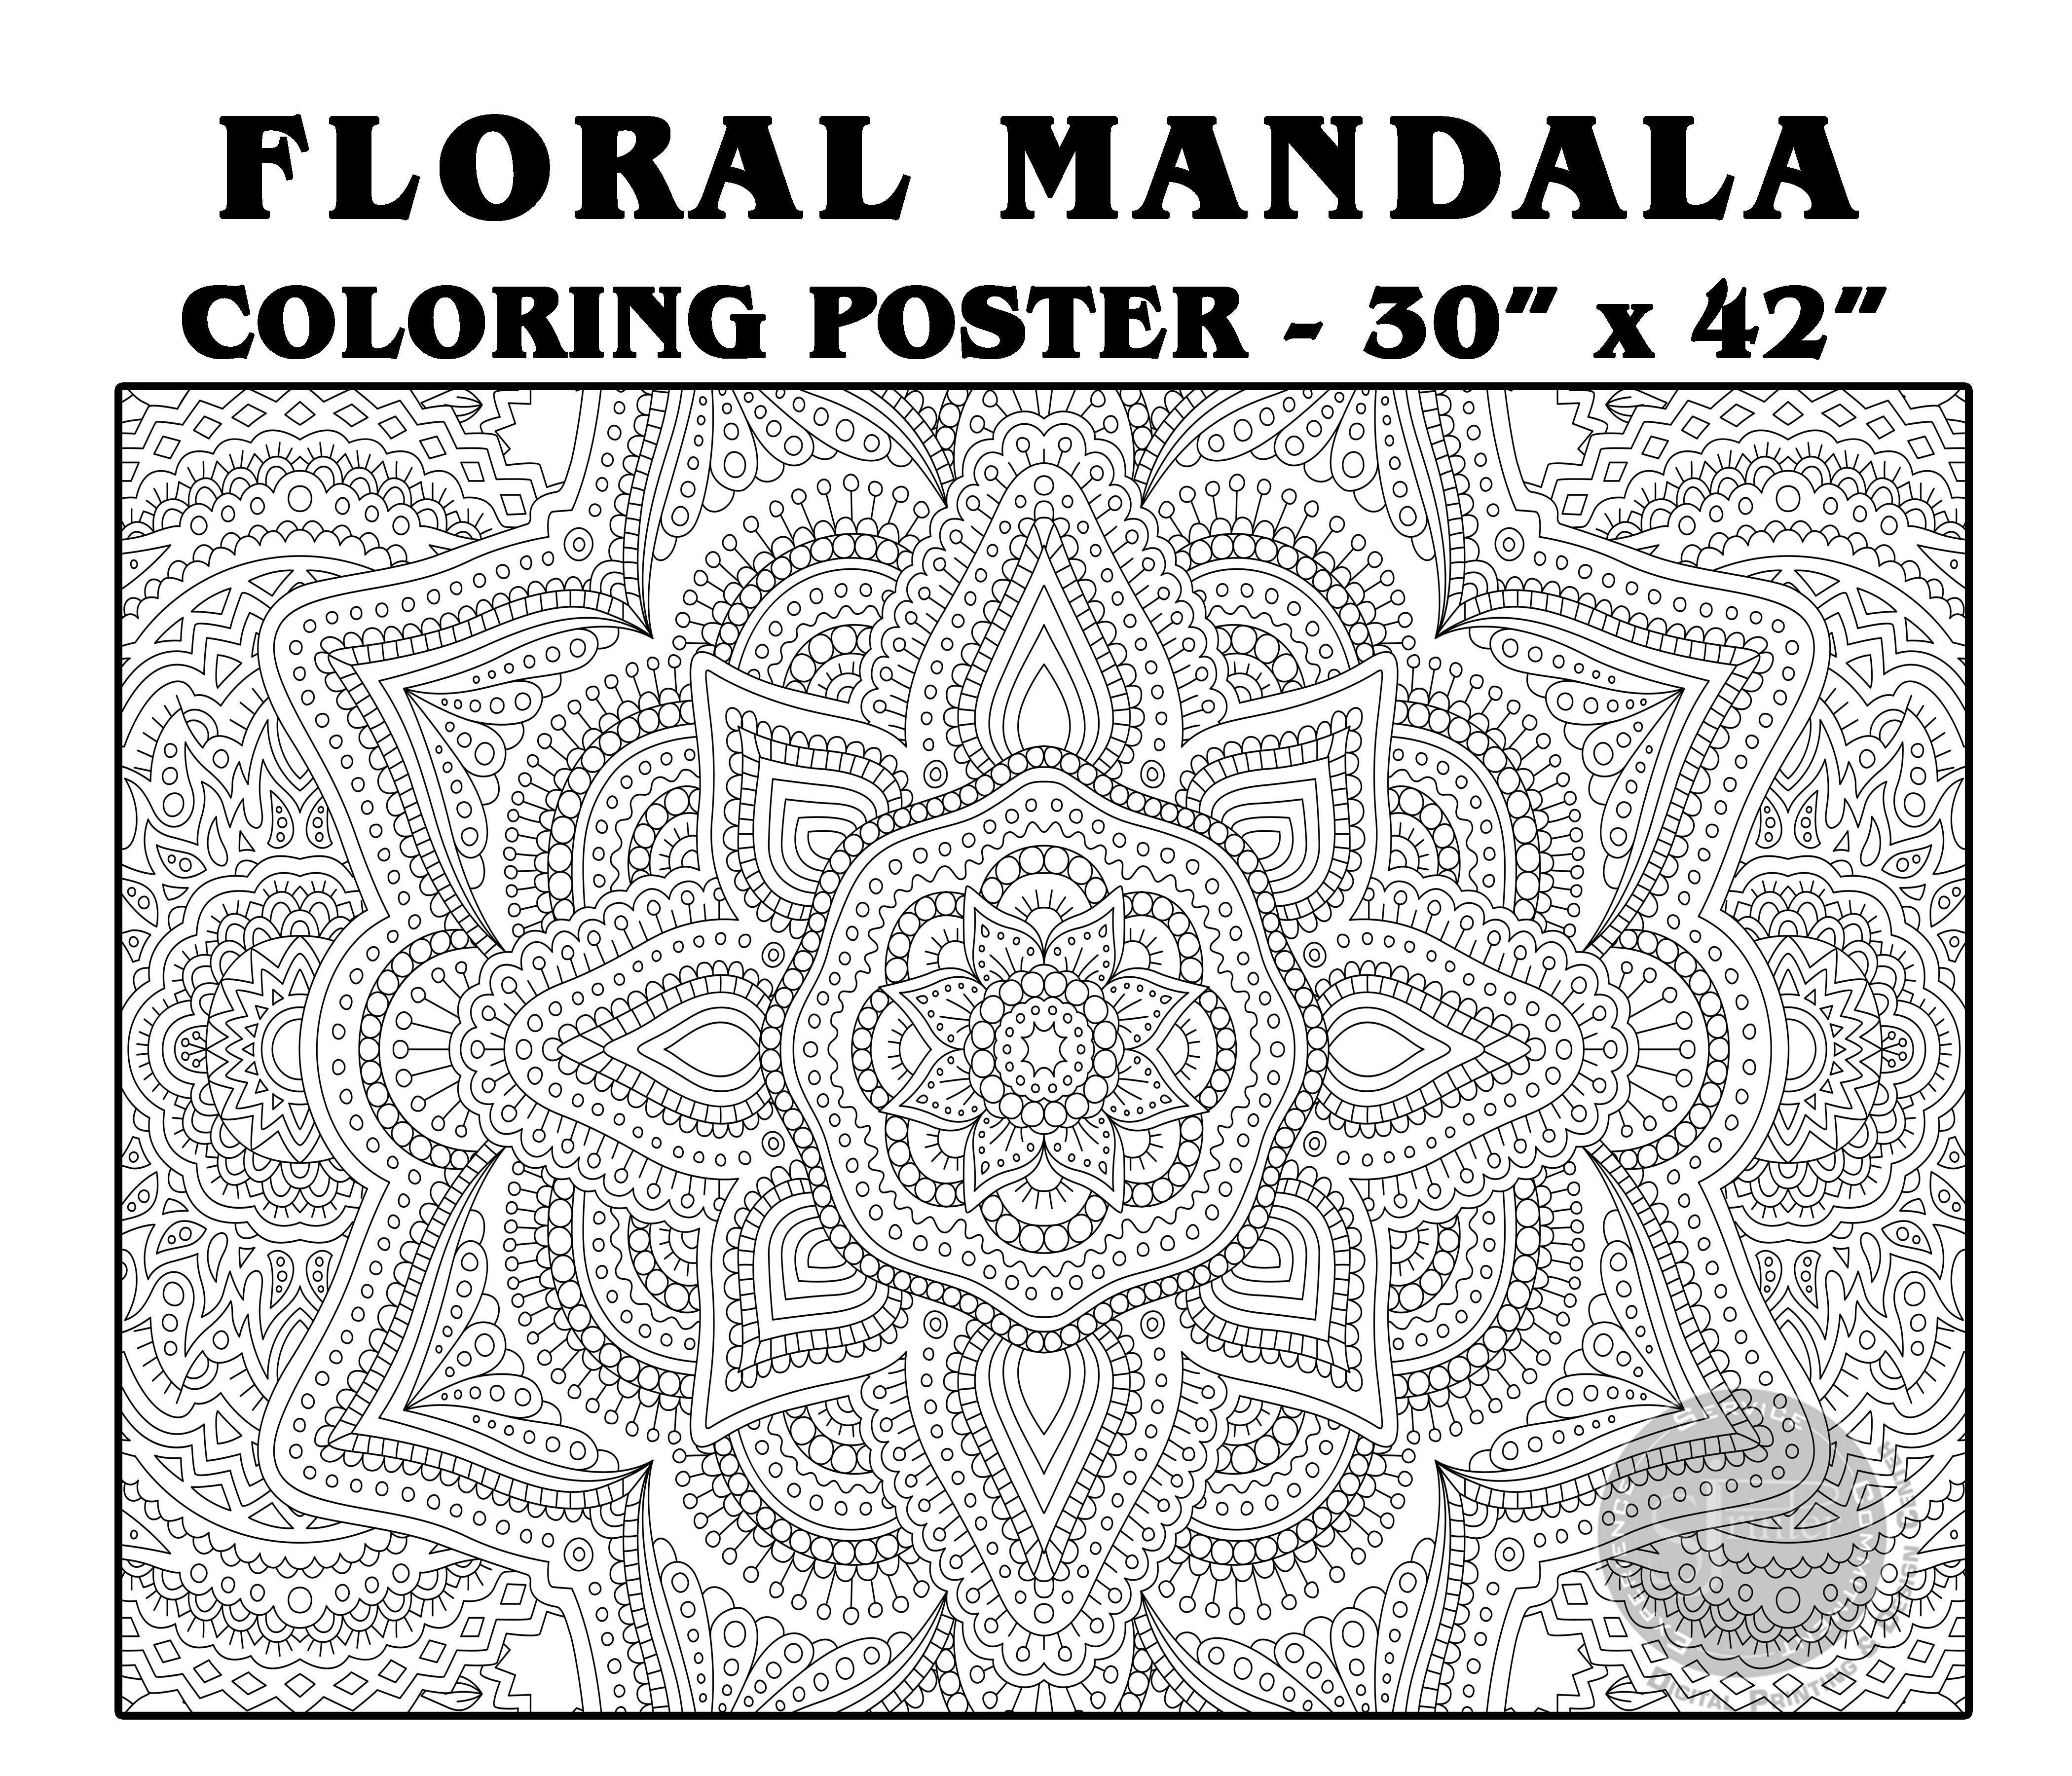 Colarr 3 Pack Giant Coloring Posters 118 x 11.8 Inch Jumbo Mandalas  Coloring Sheets Flower Animal Large Coloring Pages for Kids Adult Toddler  Wall